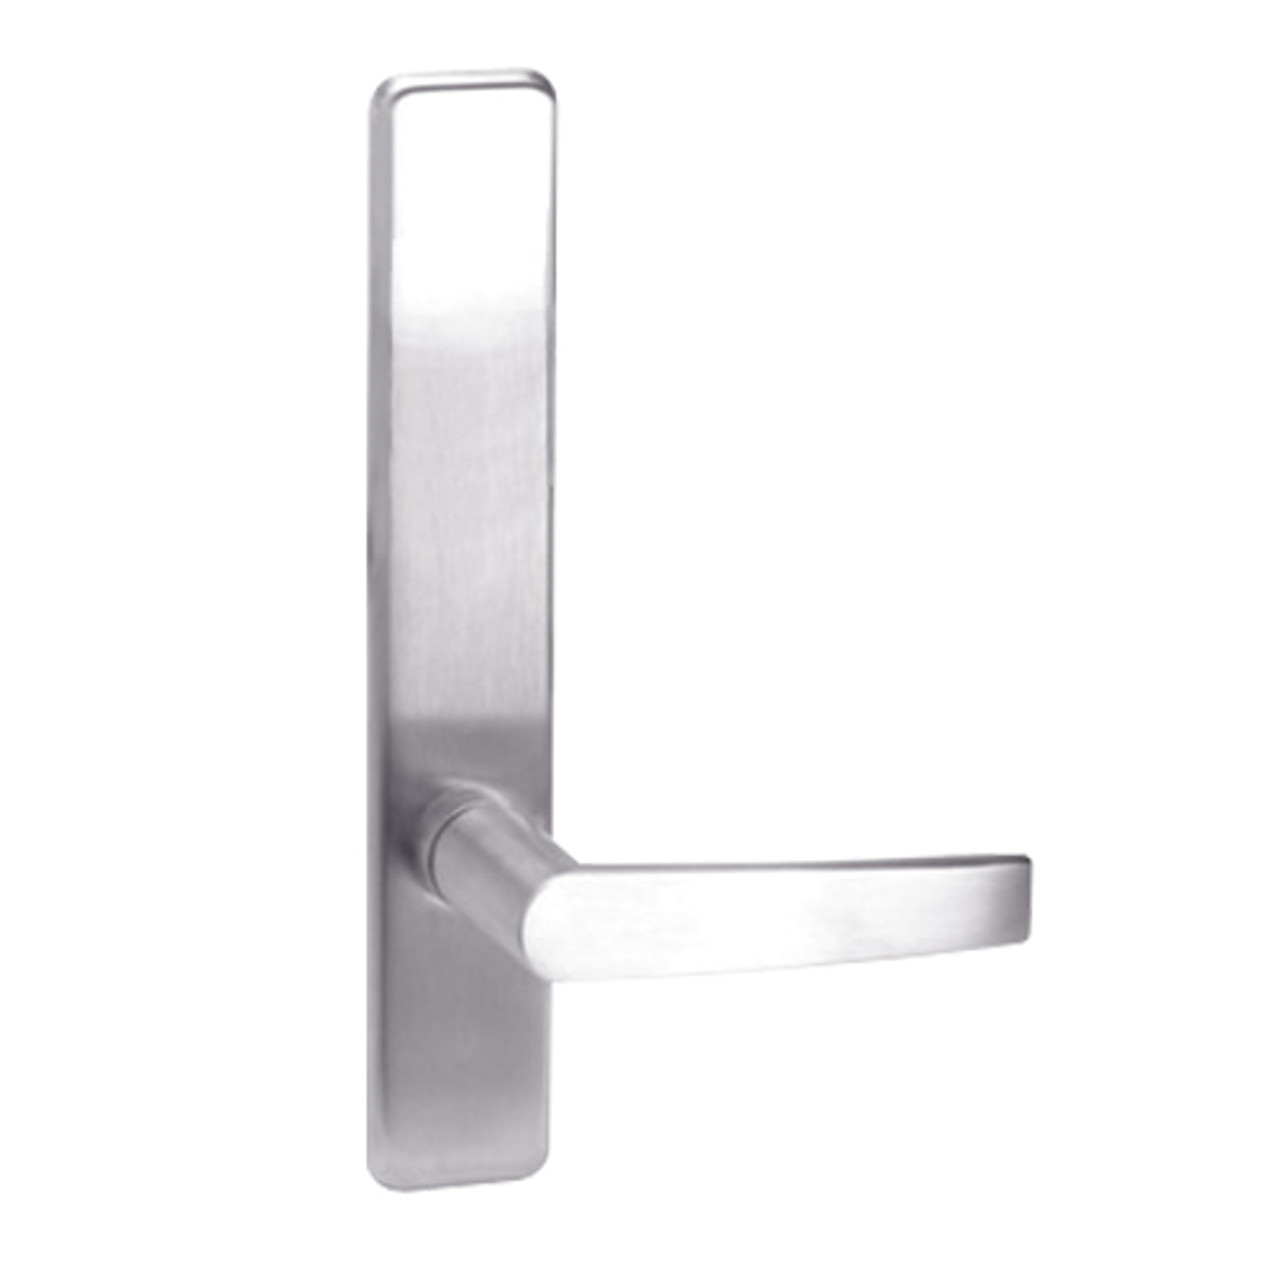 A810-629-LHR Corbin ED4000 Series Exit Device Trim with Passage Armstrong Lever in Bright Stainless Steel Finish